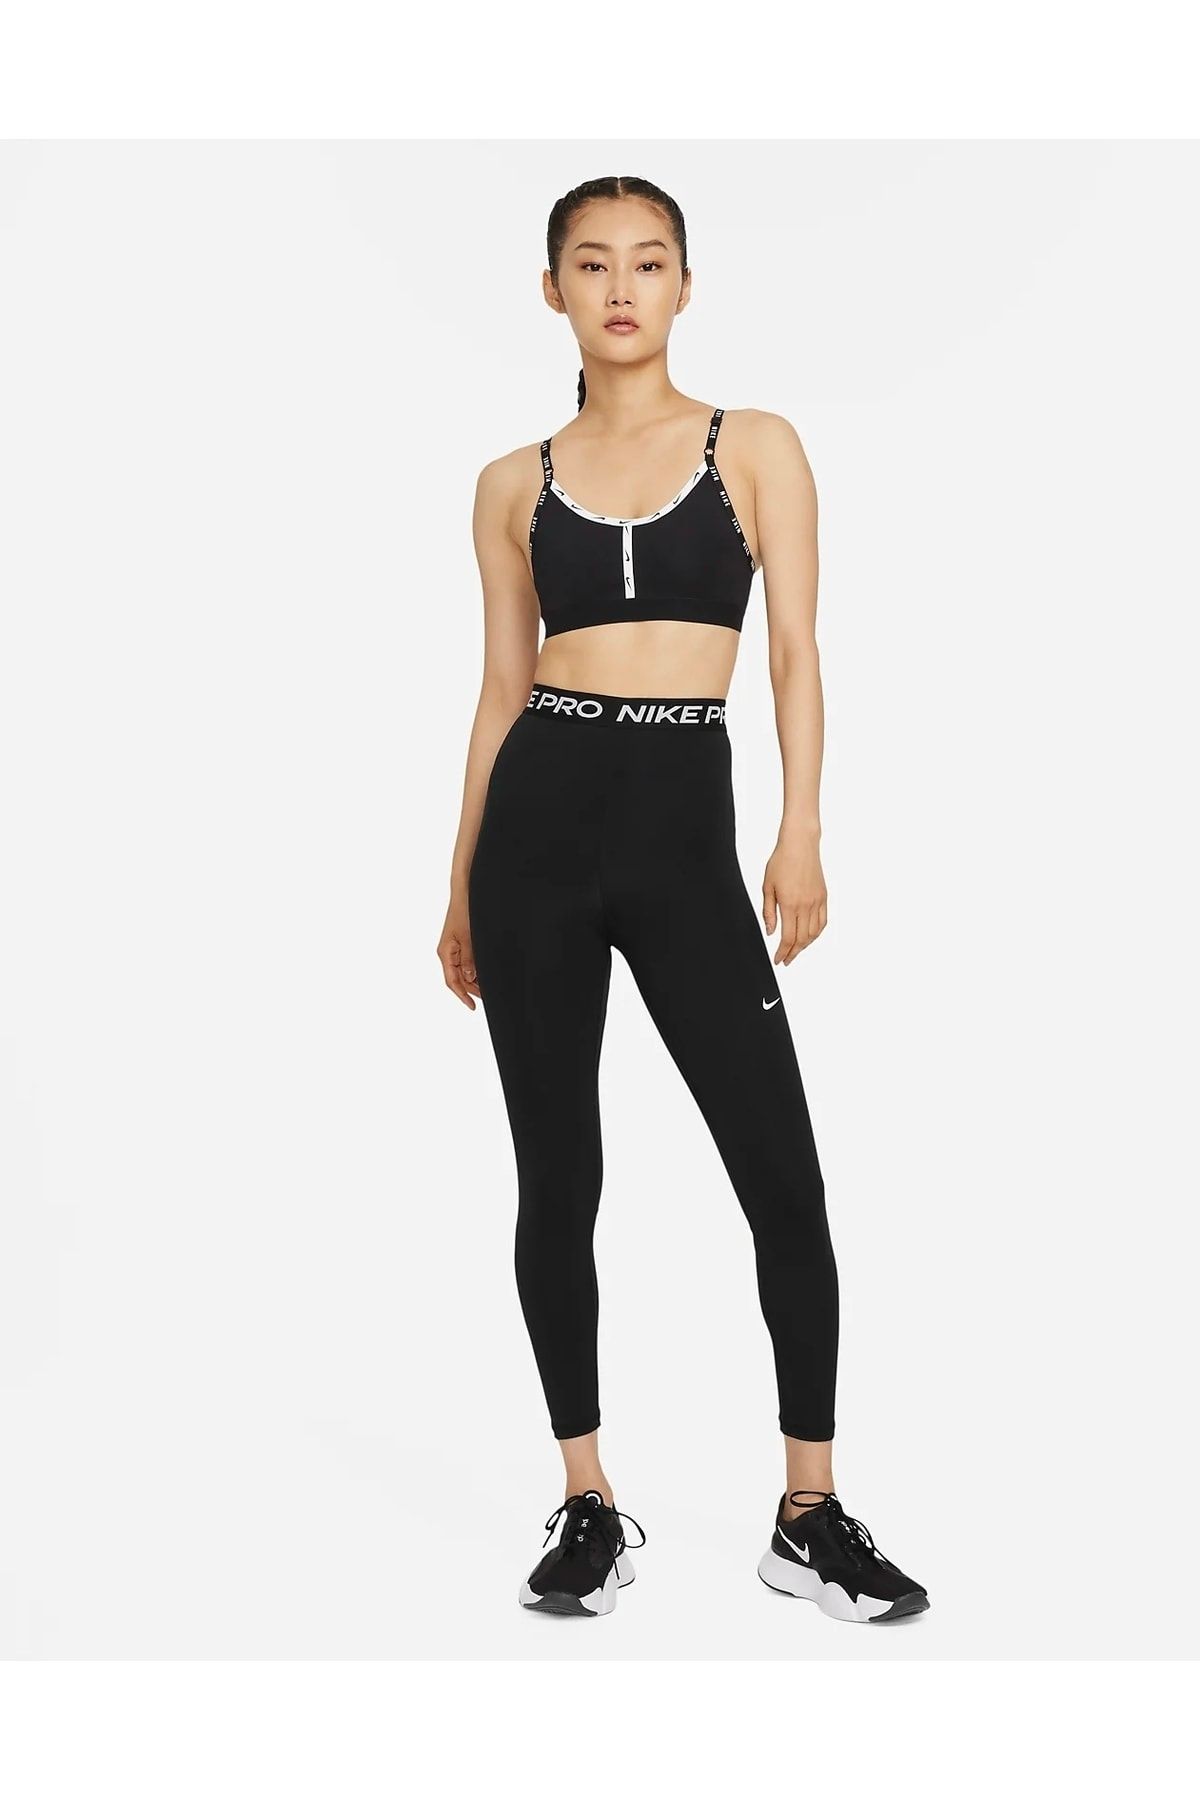 Looks Fashion on X: Sporty Outfits - ♡ Nike Workout Clothing, Yoga Tops, Sports Bra, Yoga Pants, Motivation is here!, Fitness Apparel